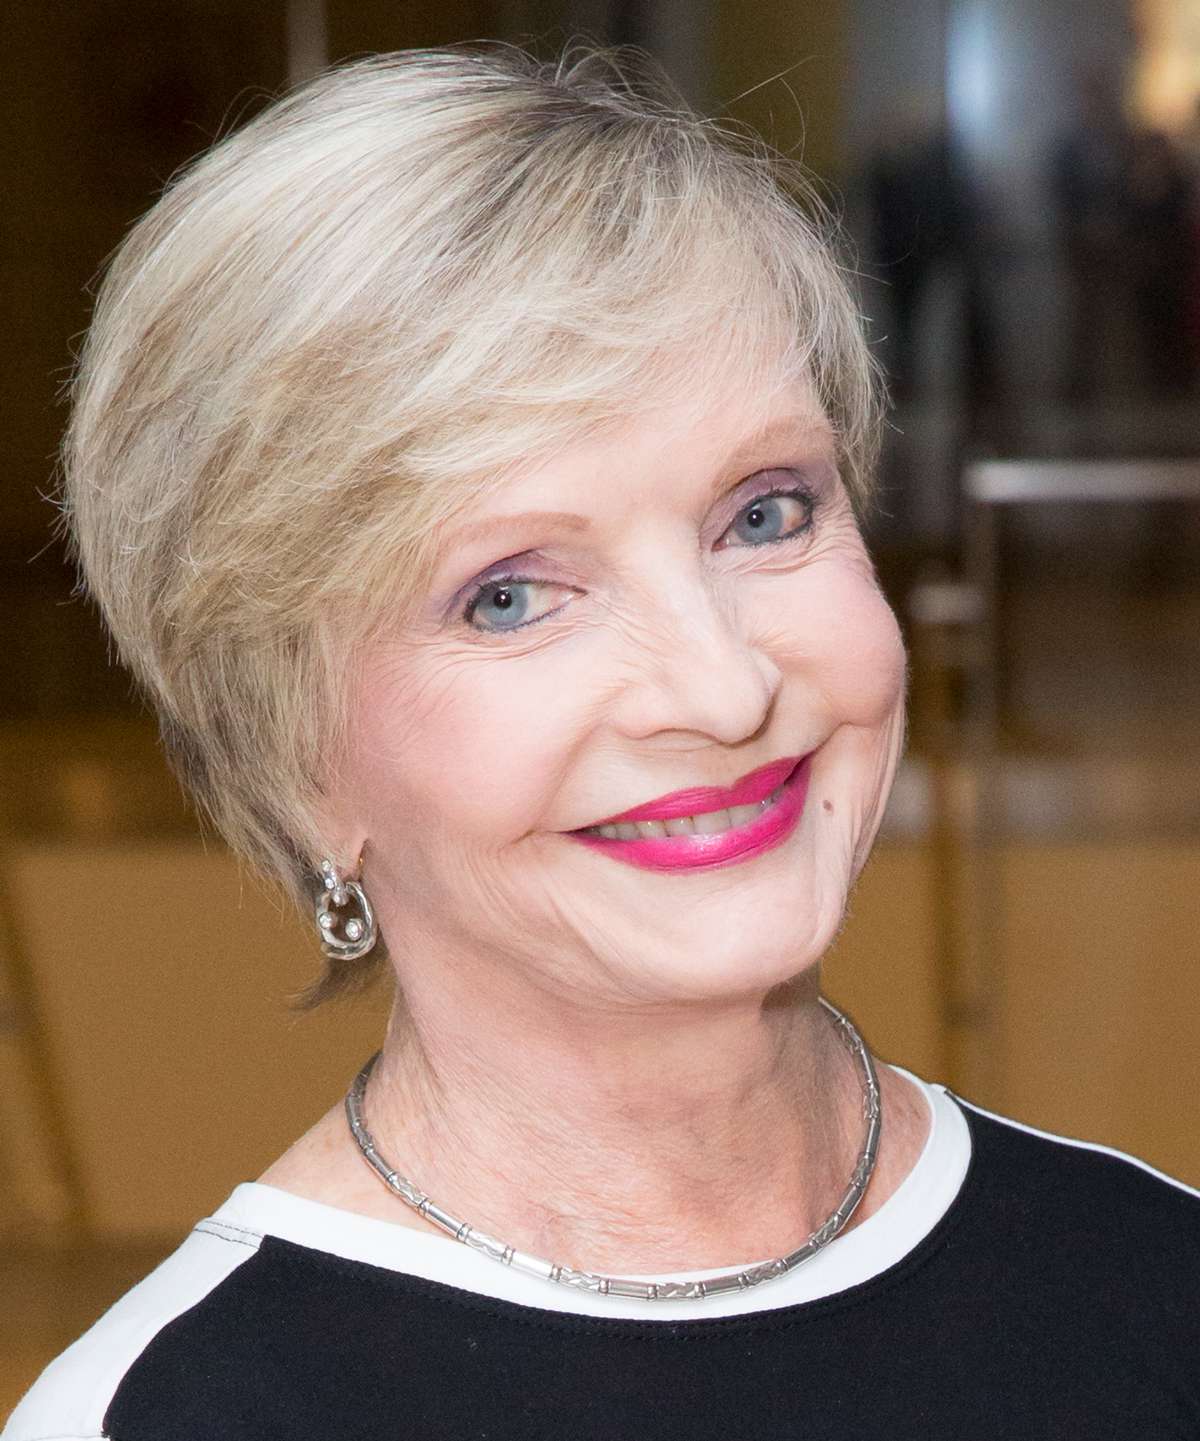 Actress Florence Henderson attends the Stray Cat Alliance Presents Benefit Performance Of Celebrity Autobiography at CAA on September 23, 2016 in Los Angeles, California.